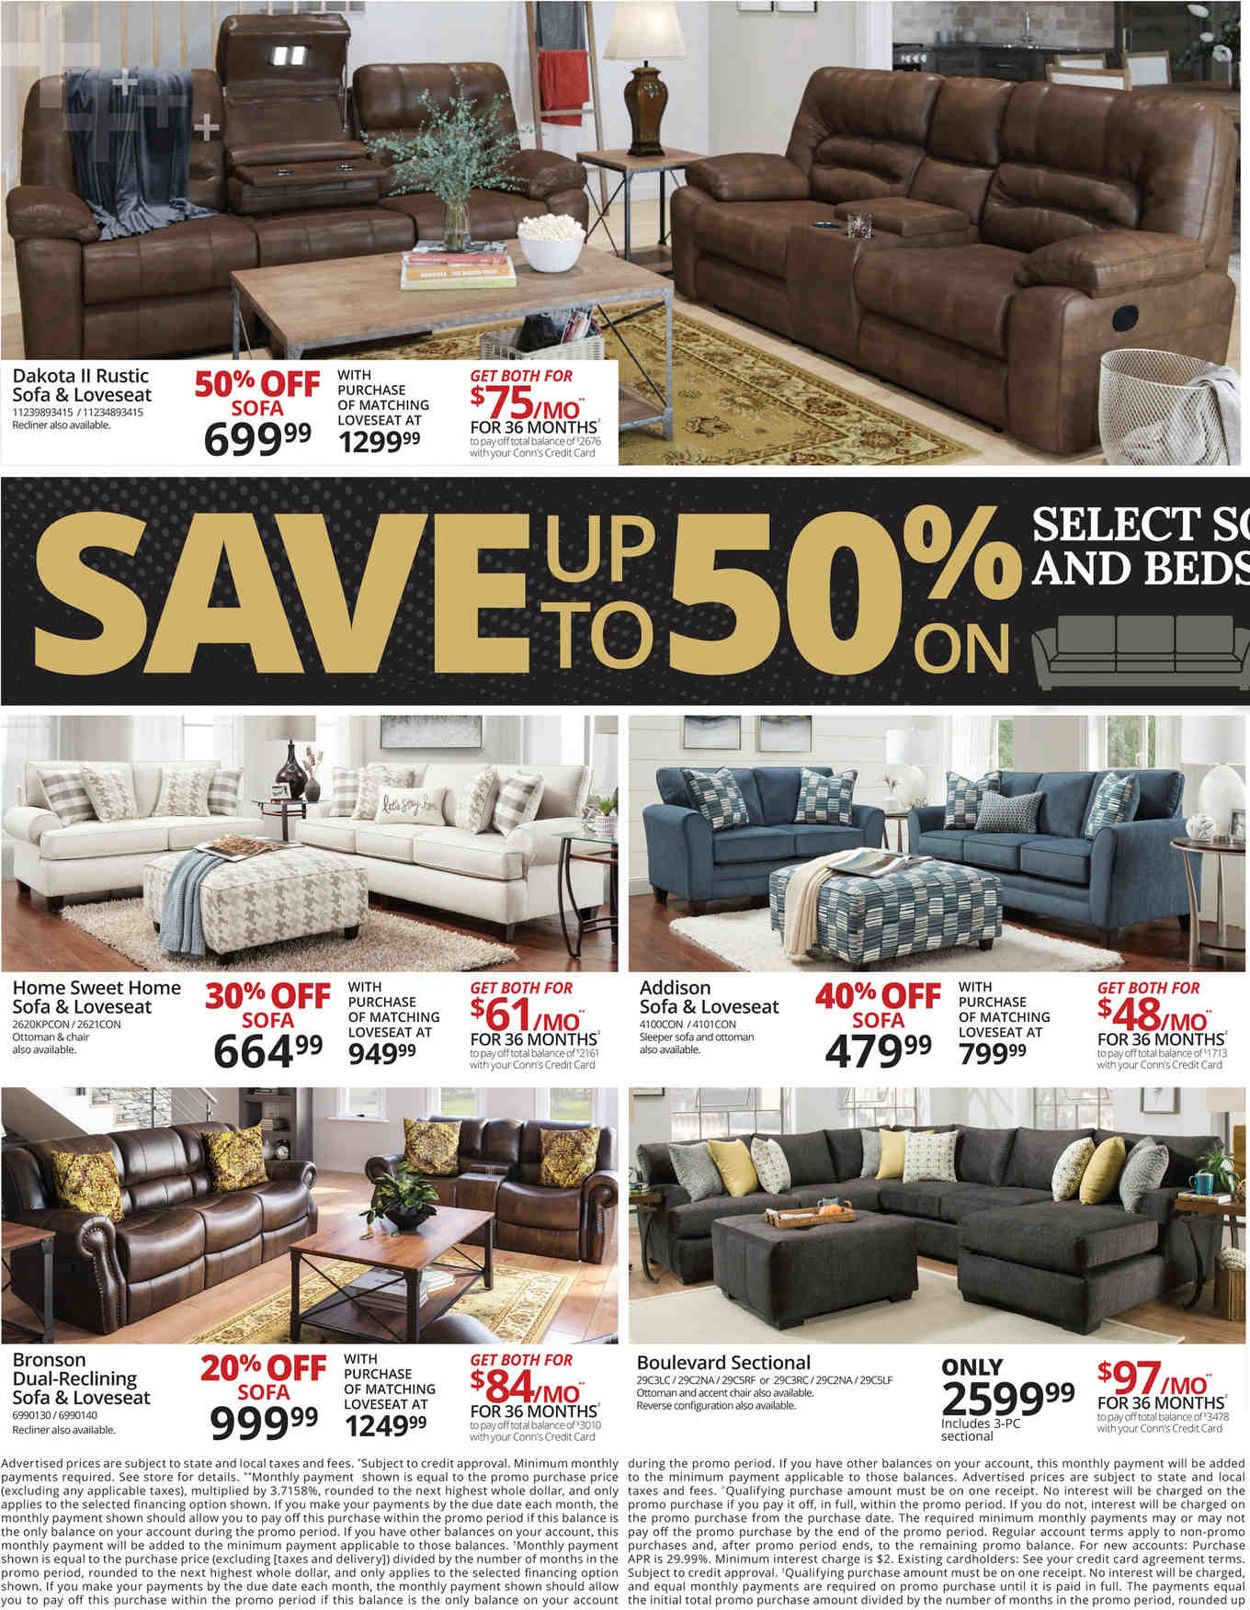 Conn's Home Plus BLACK FRIDAY 2021 Weekly Ad Circular - valid 10/31-11/02/2021 (Page 2)